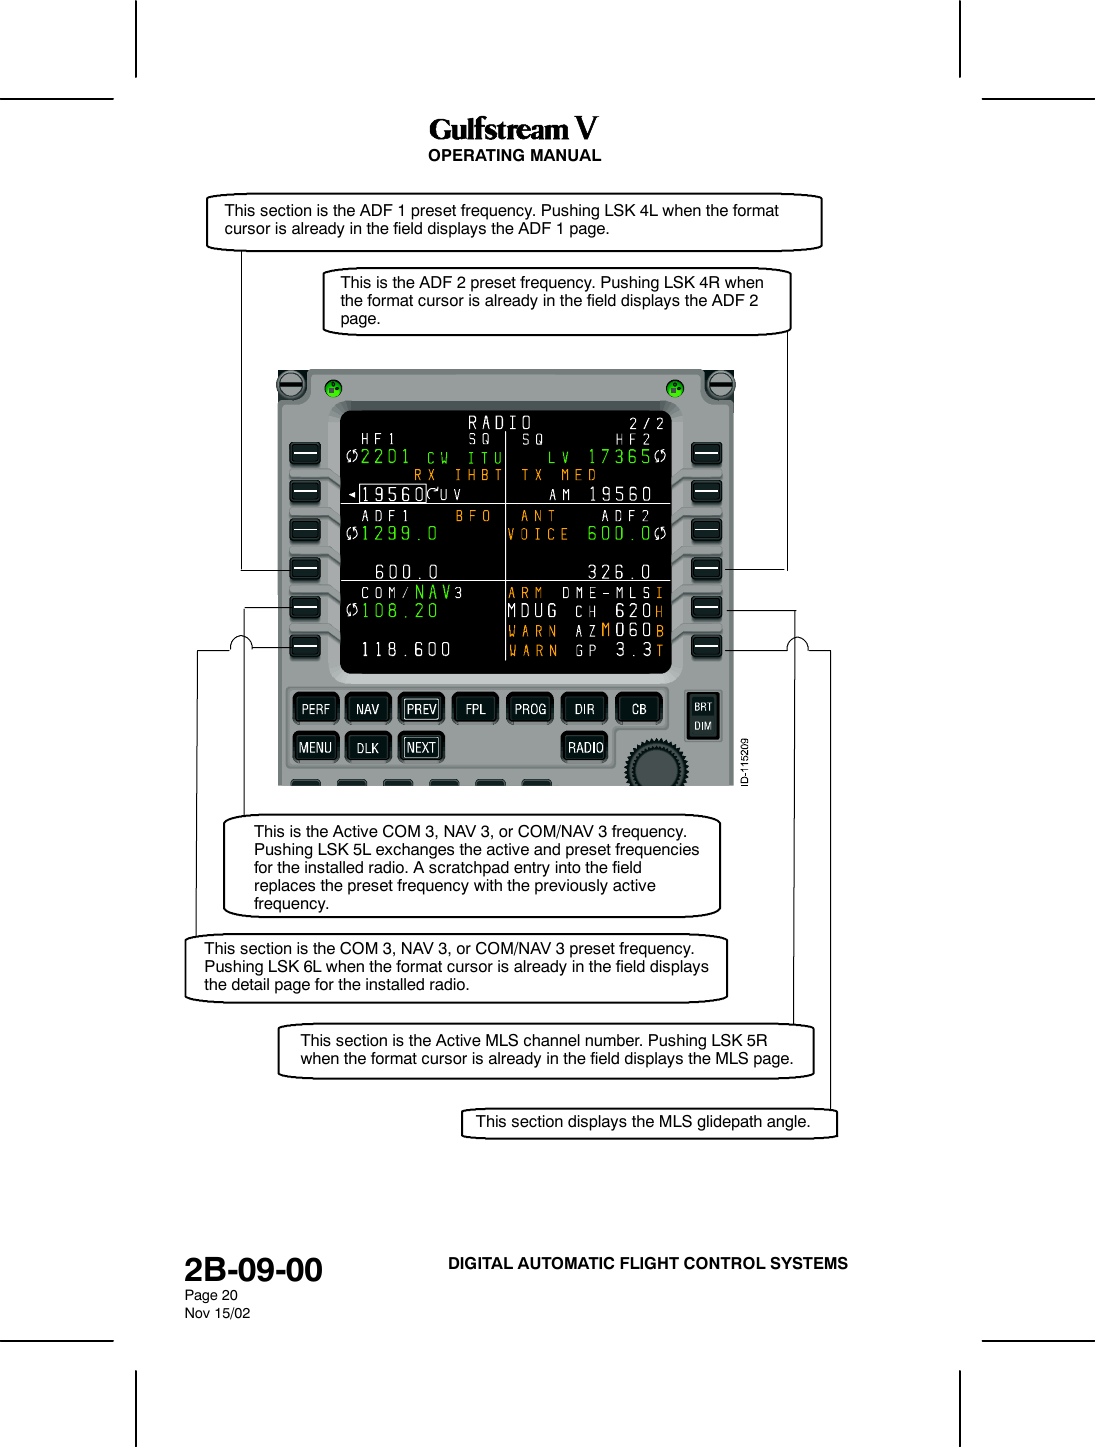 OPERATING MANUAL2B-09-00Page 20Nov 15/02DIGITAL AUTOMATIC FLIGHT CONTROL SYSTEMSThis section is the ADF 1 preset frequency. Pushing LSK 4L when the formatcursor is already in the field displays the ADF 1 page.This is the ADF 2 preset frequency. Pushing LSK 4R whenthe format cursor is already in the field displays the ADF 2page.This is the Active COM 3, NAV 3, or COM/NAV 3 frequency.Pushing LSK 5L exchanges the active and preset frequenciesfor the installed radio. A scratchpad entry into the fieldreplaces the preset frequency with the previously activefrequency.This section is the COM 3, NAV 3, or COM/NAV 3 preset frequency.Pushing LSK 6L when the format cursor is already in the field displaysthe detail page for the installed radio.This section is the Active MLS channel number. Pushing LSK 5Rwhen the format cursor is already in the field displays the MLS page.This section displays the MLS glidepath angle.